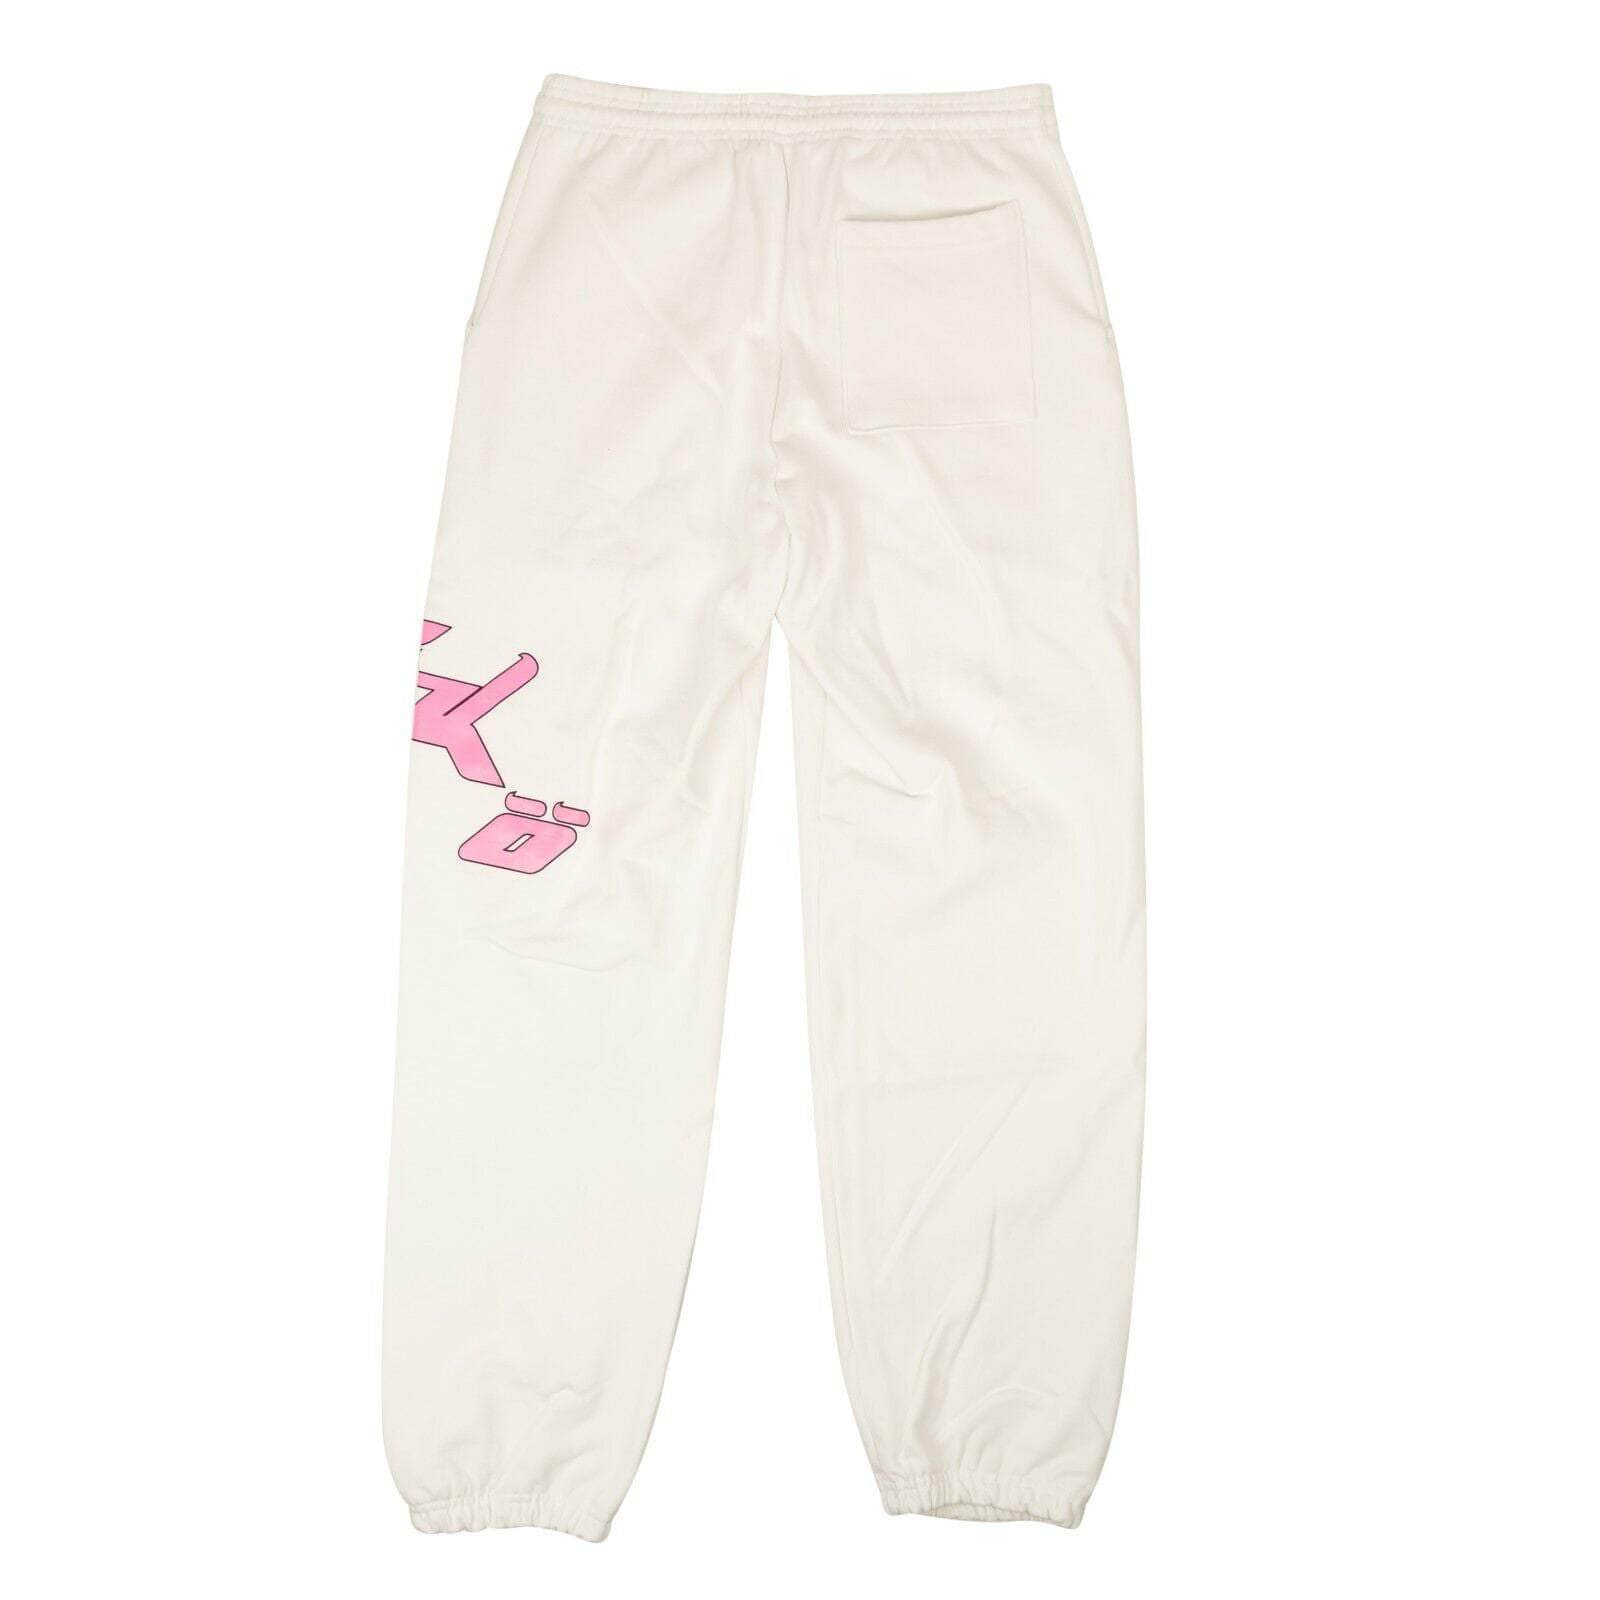 Sicko X 375 White And Pink Logo Sweatpants